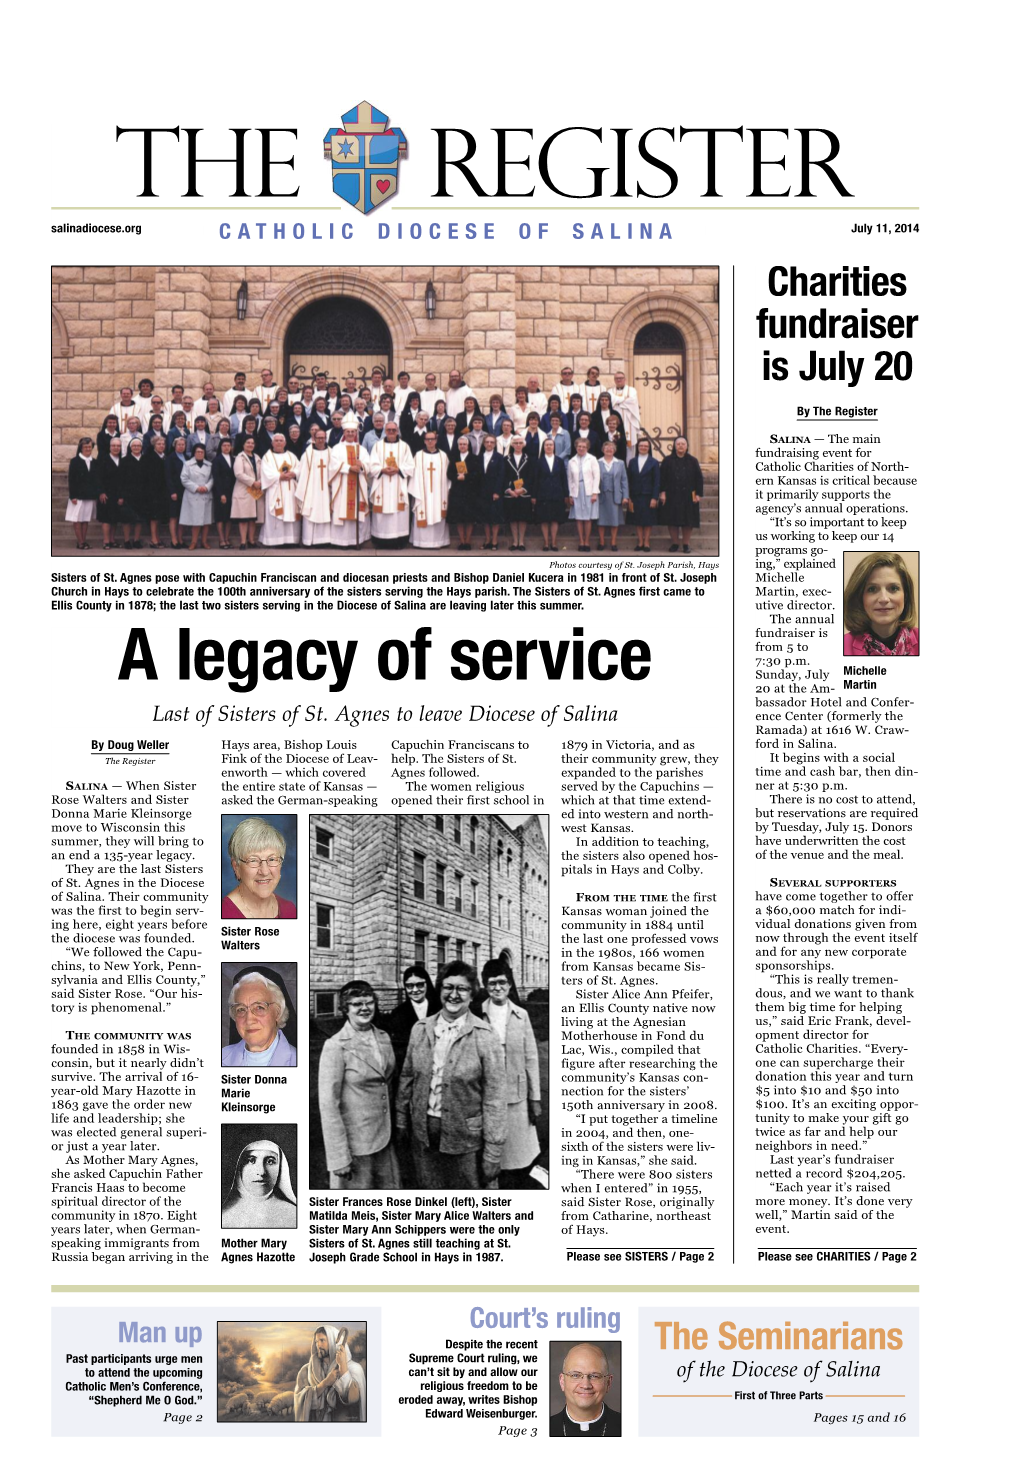 A Legacy of Service 20 at the Am - Bassador Hotel and Confer - Last of Sisters of St